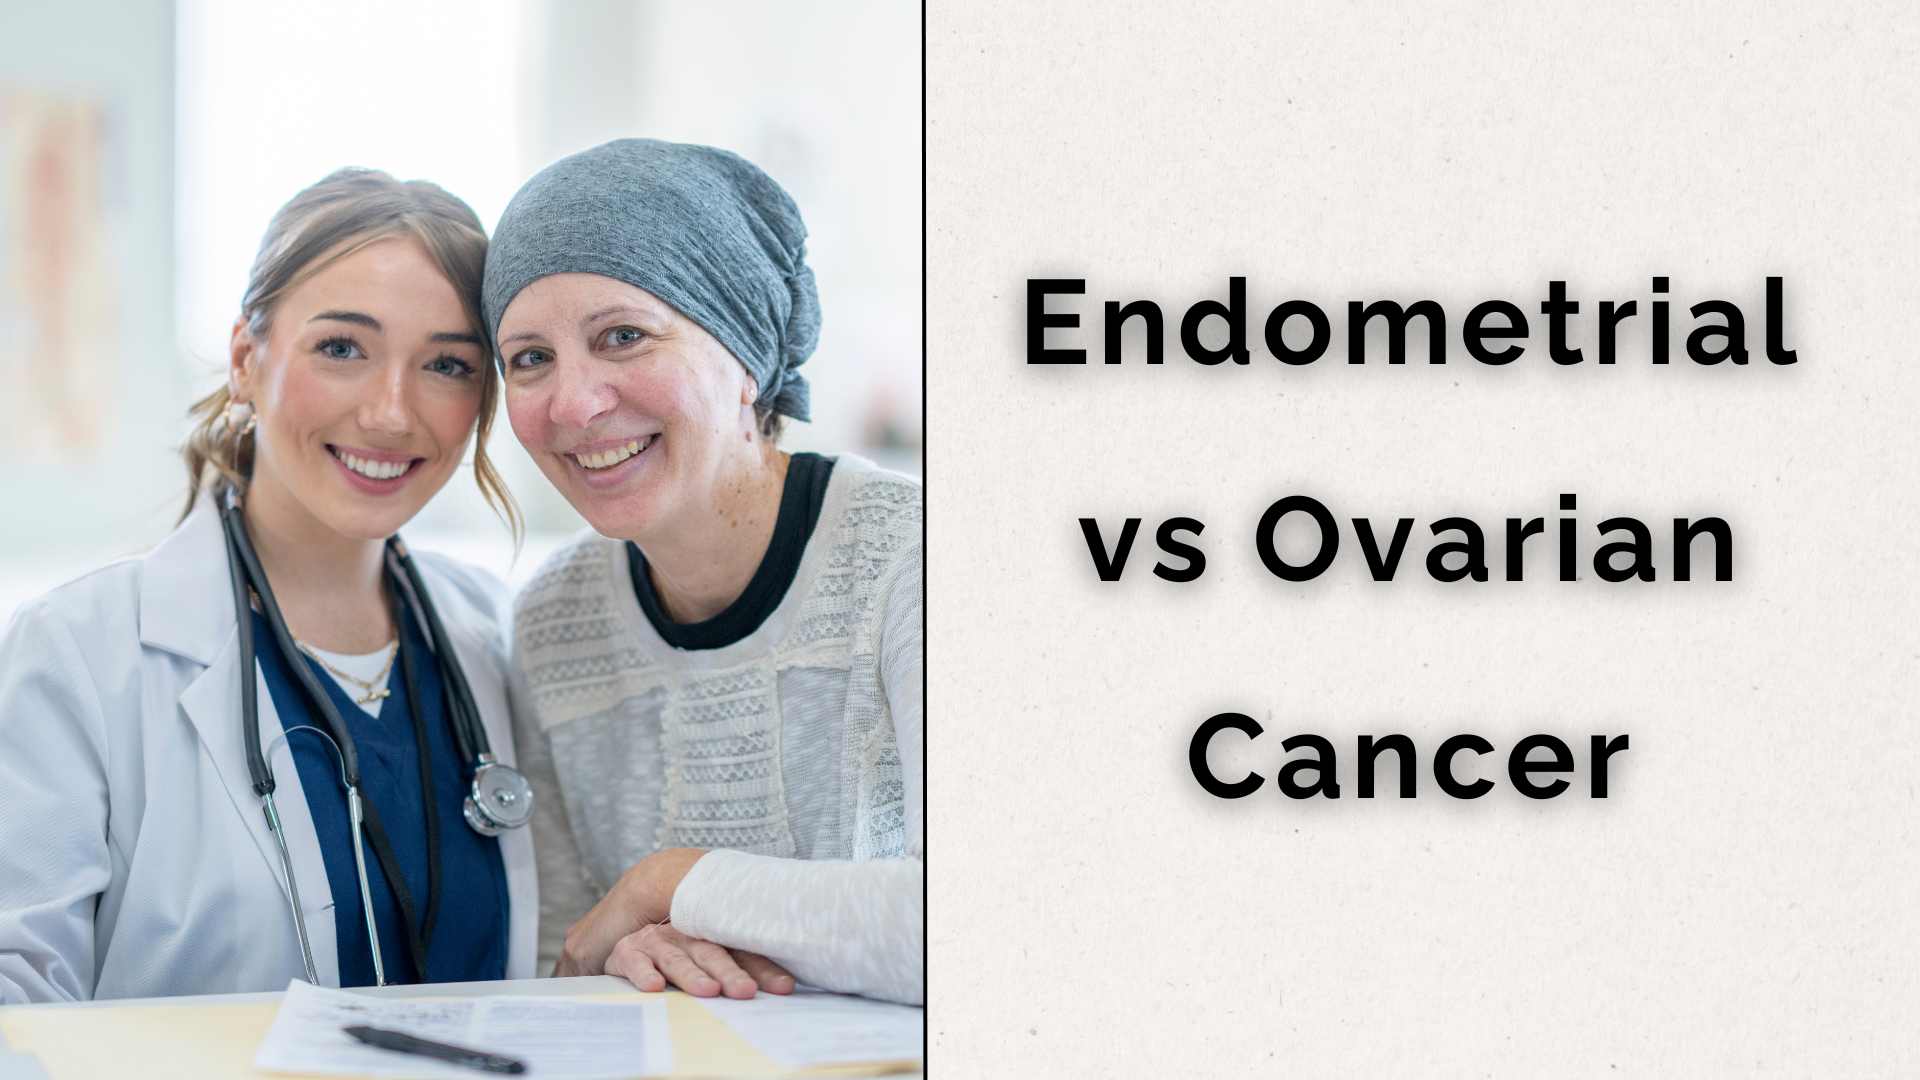 What Sets Apart Endometrial Cancer from Ovarian Cancer?